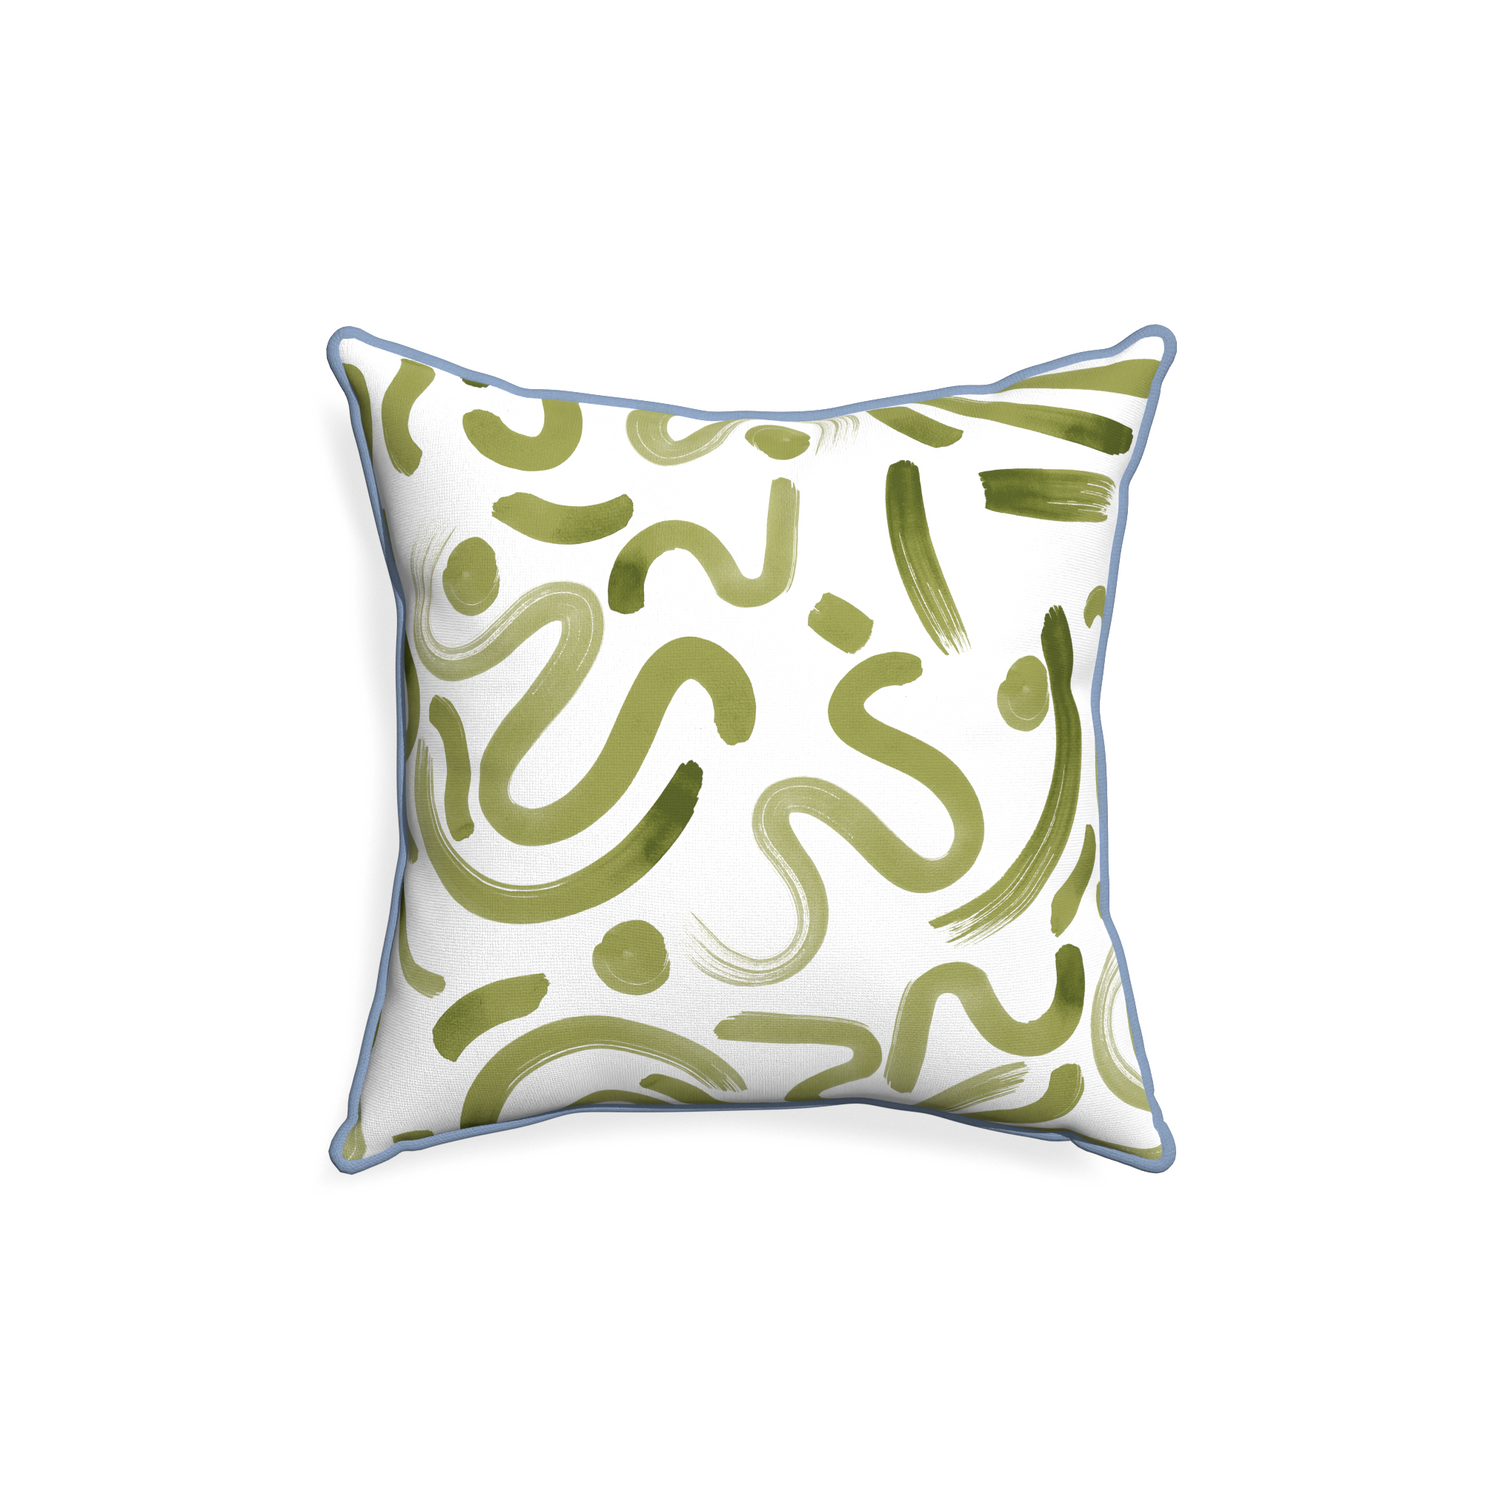 18-square hockney moss custom moss greenpillow with sky piping on white background